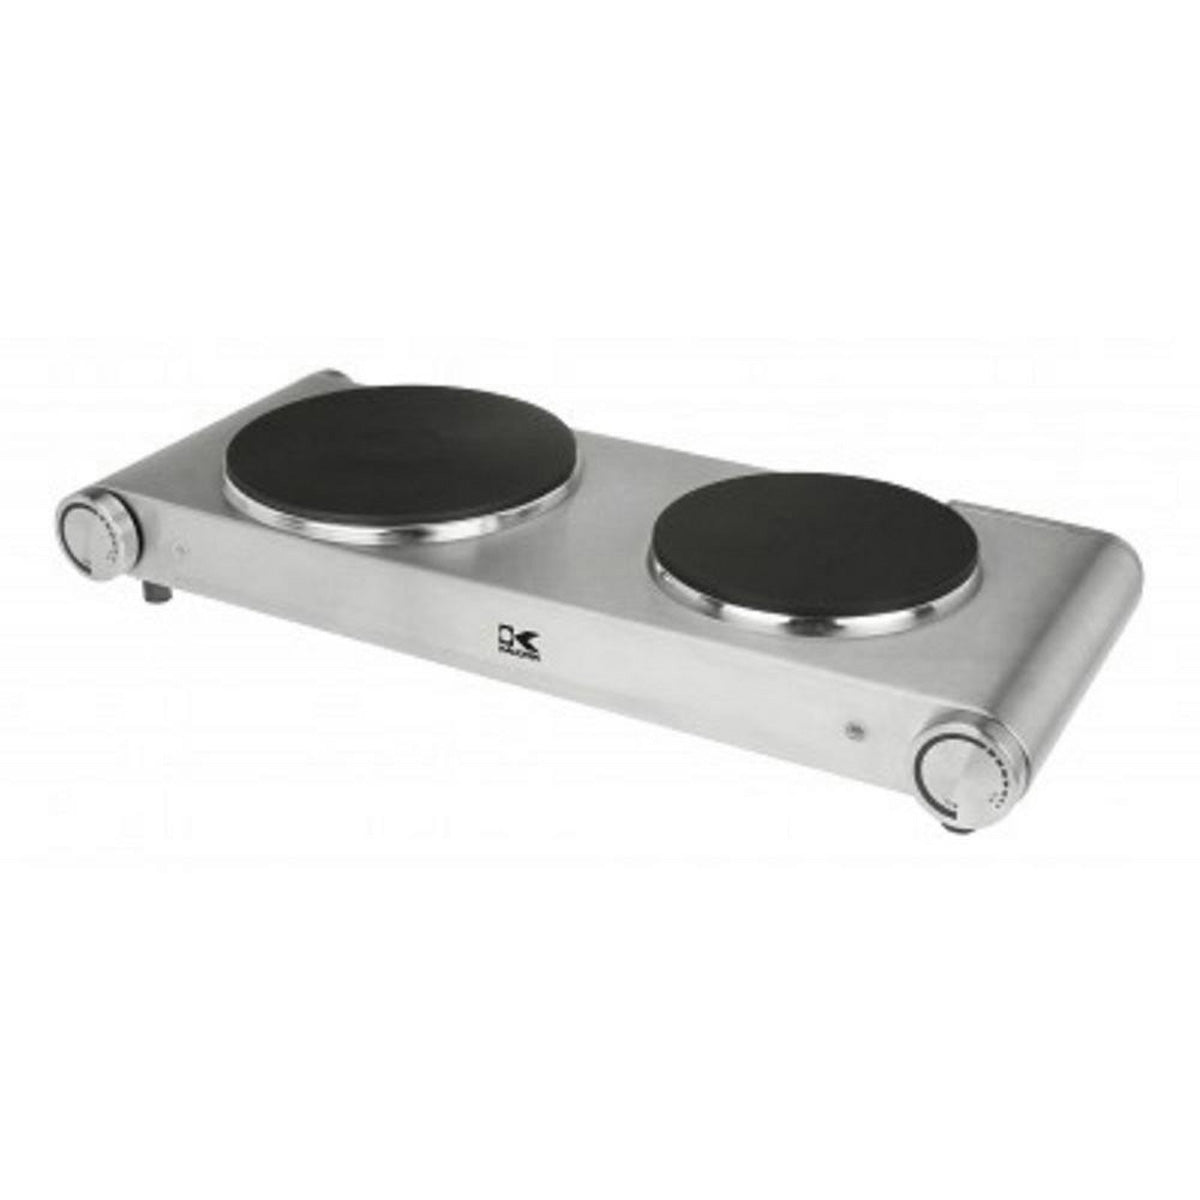 Kalorik Stainless Steel Double Cooking Plate